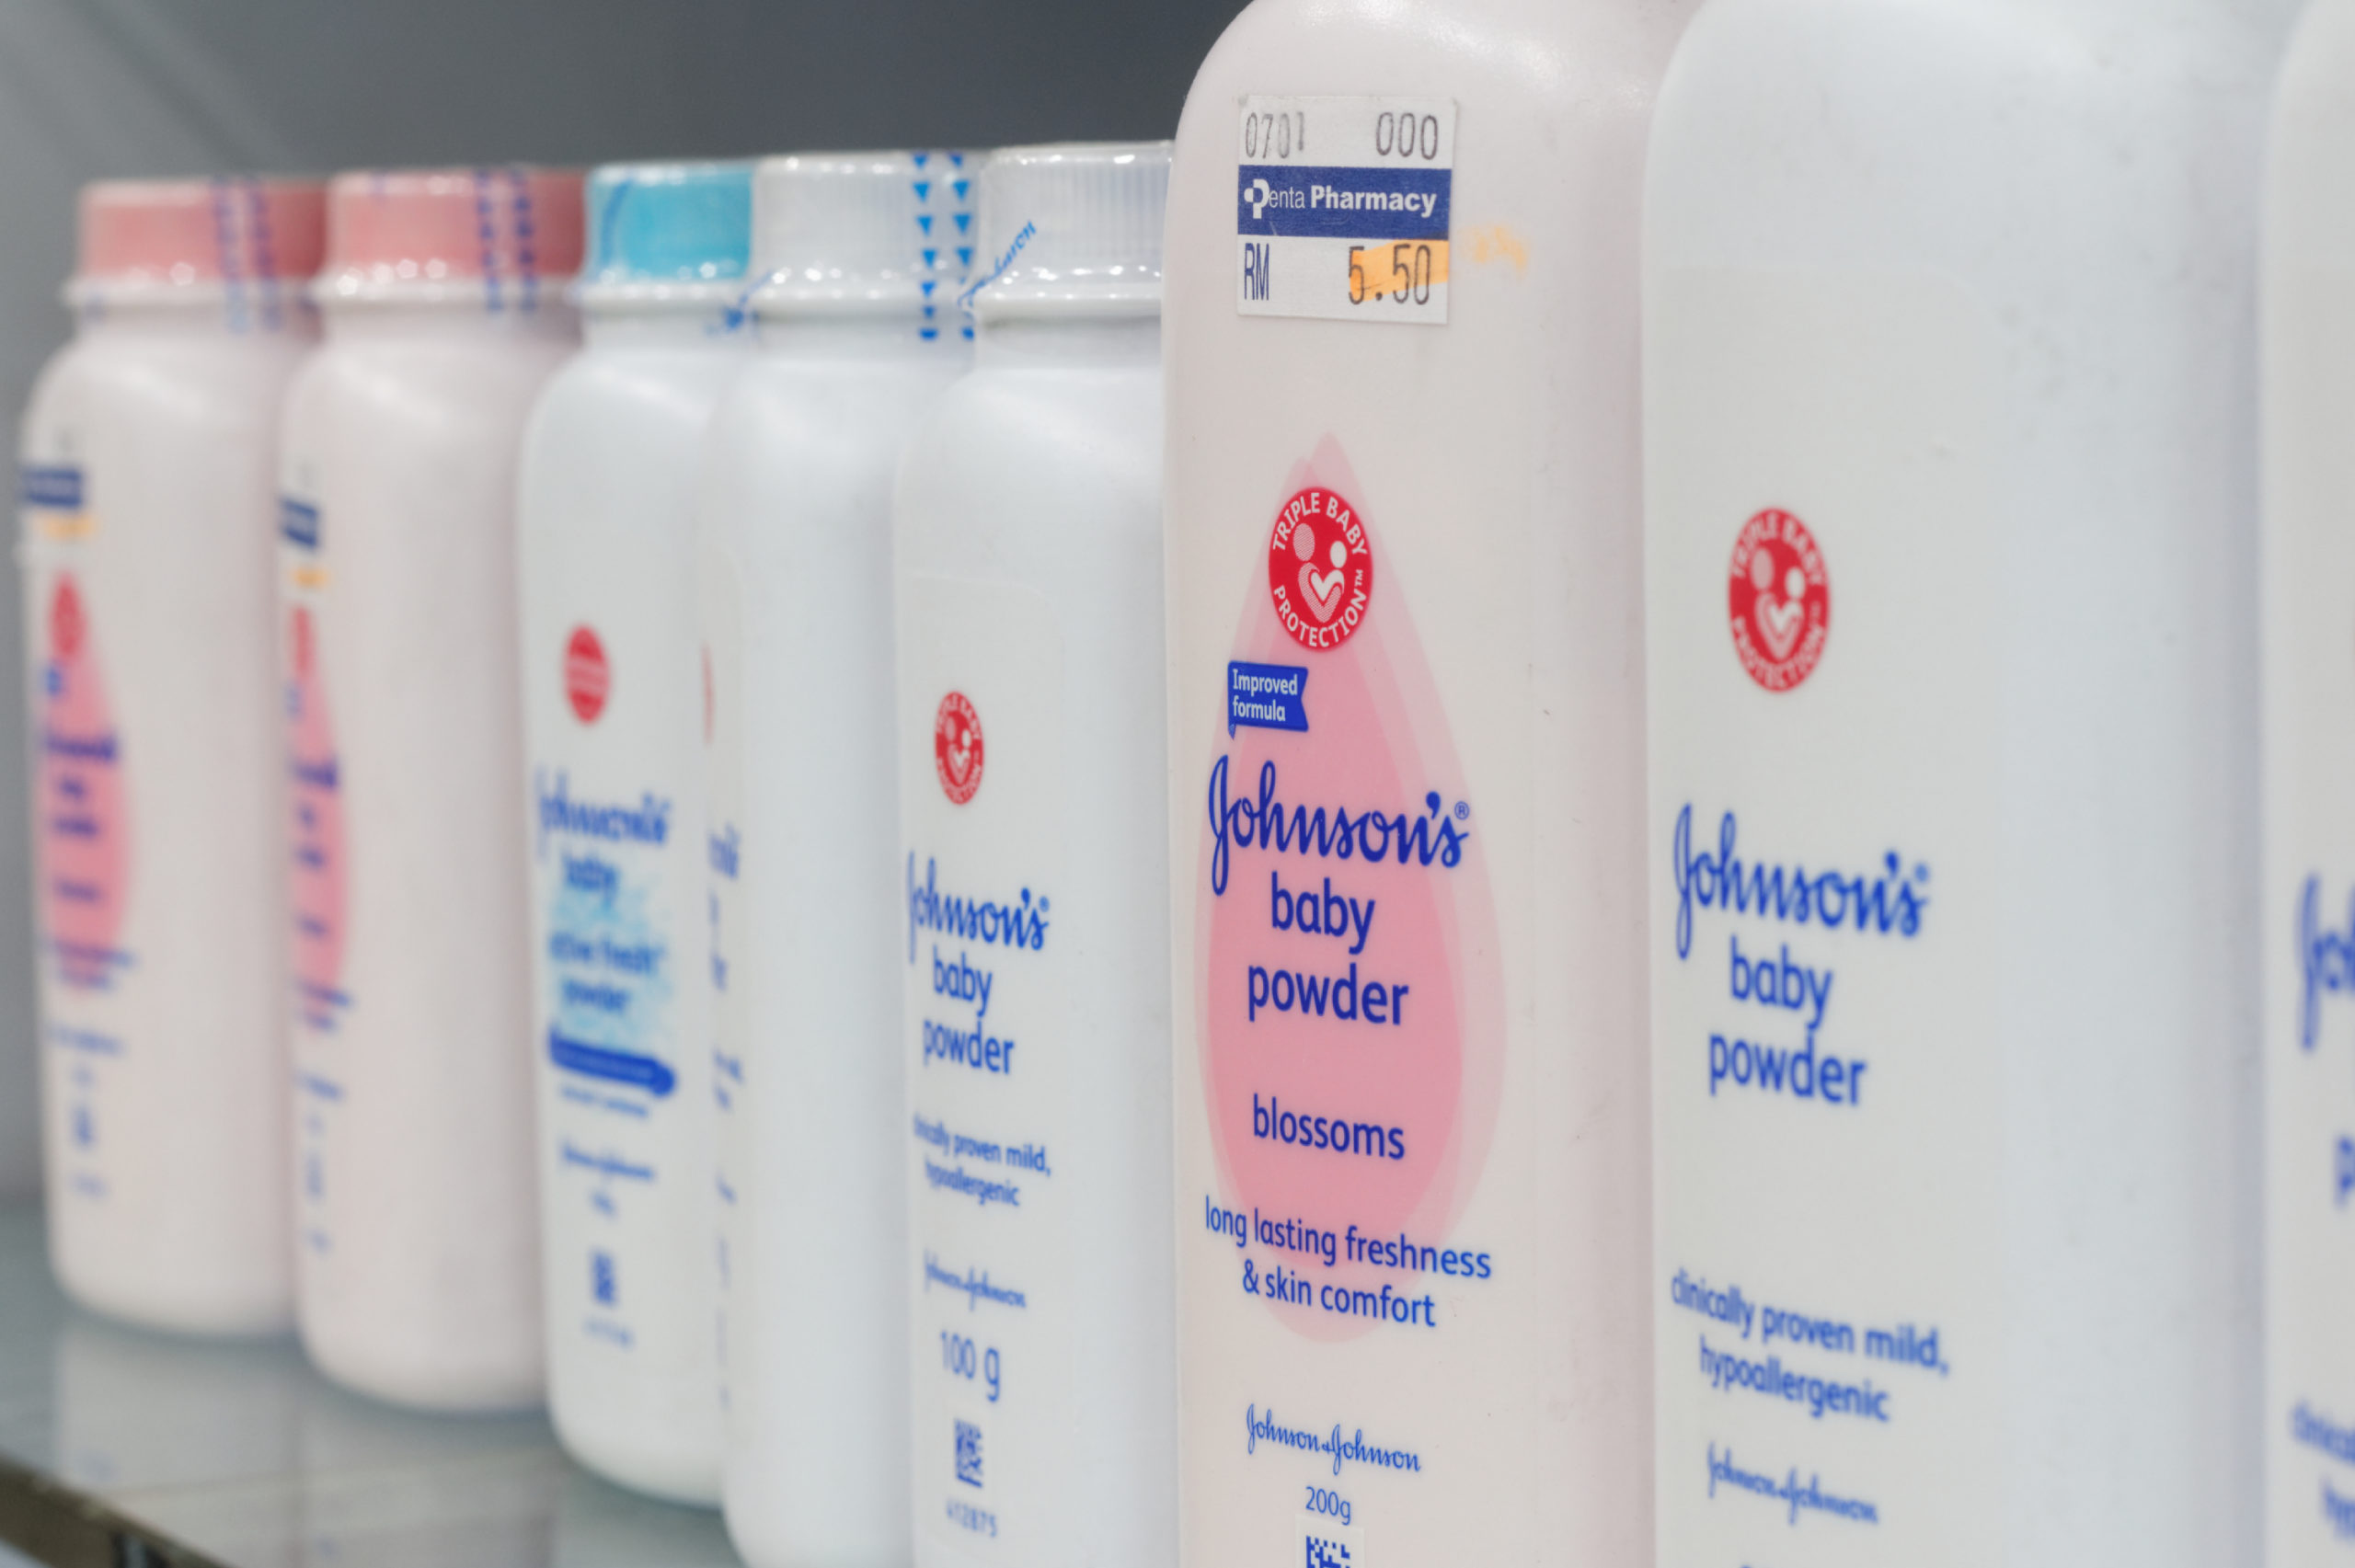 J & J’s famous baby powder can cause cancer